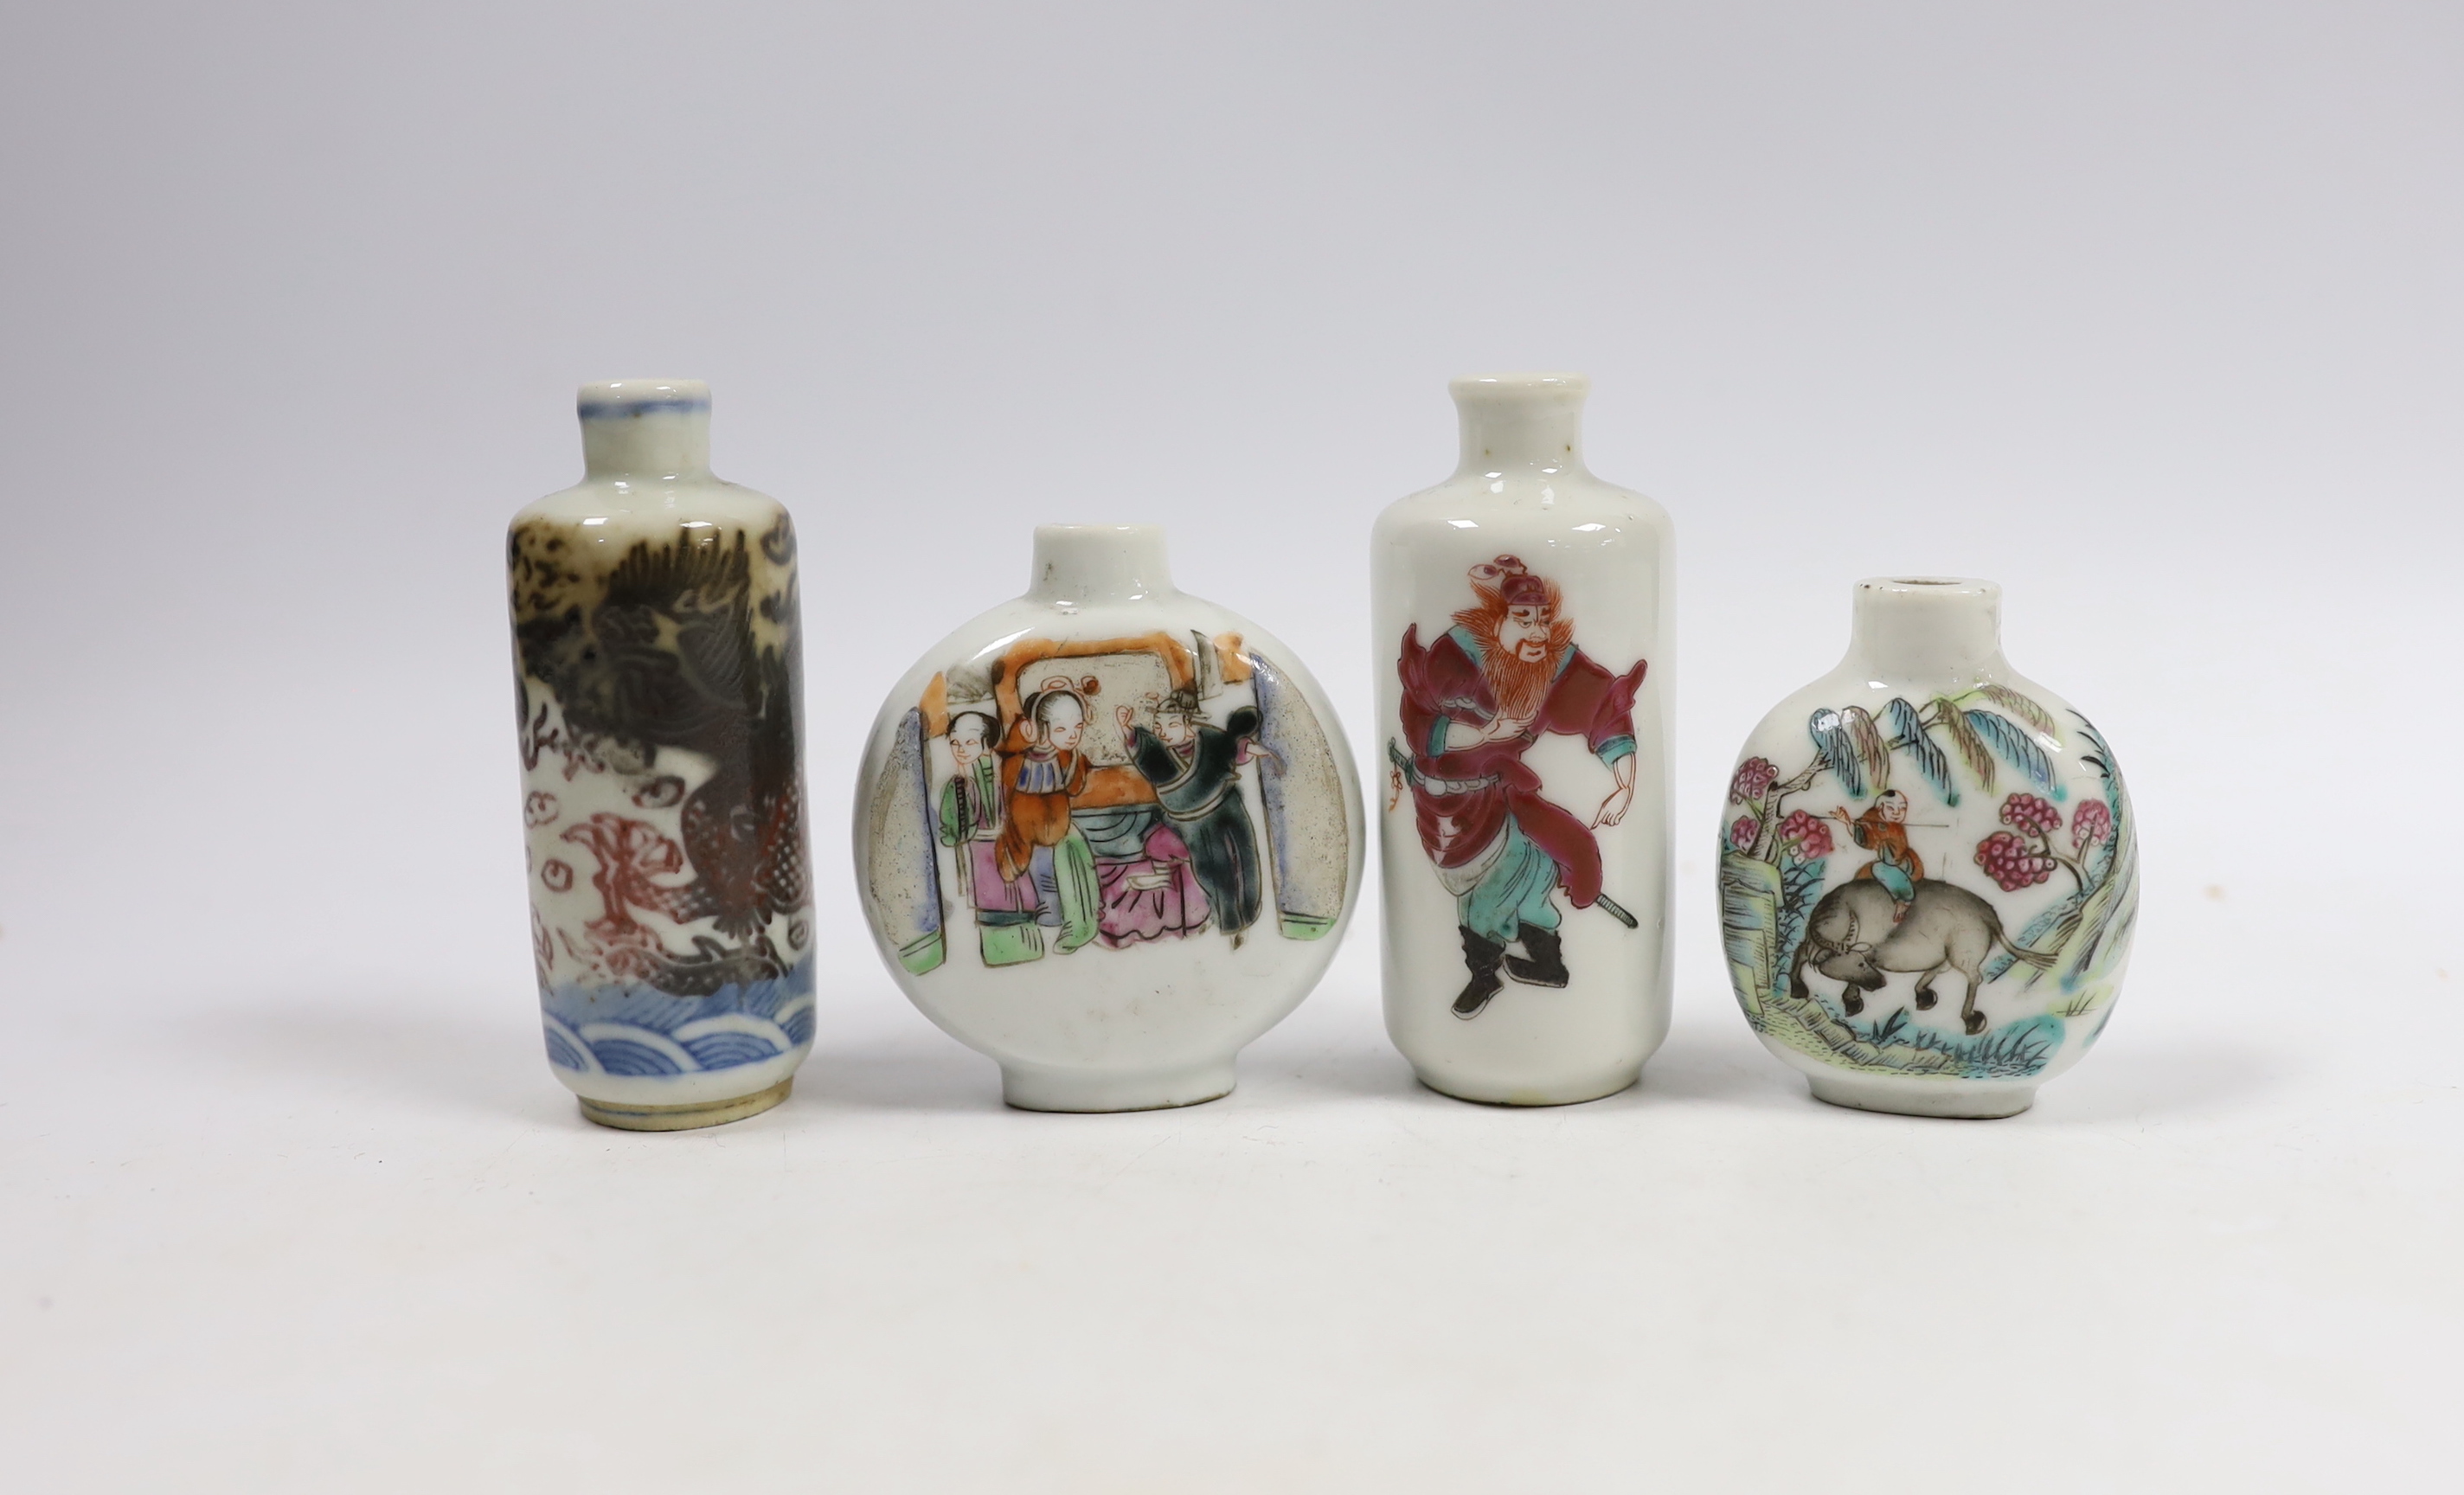 Three 19th century Chinese famille rose snuff bottles, and an underglaze copper red ‘Dragon’ snuff